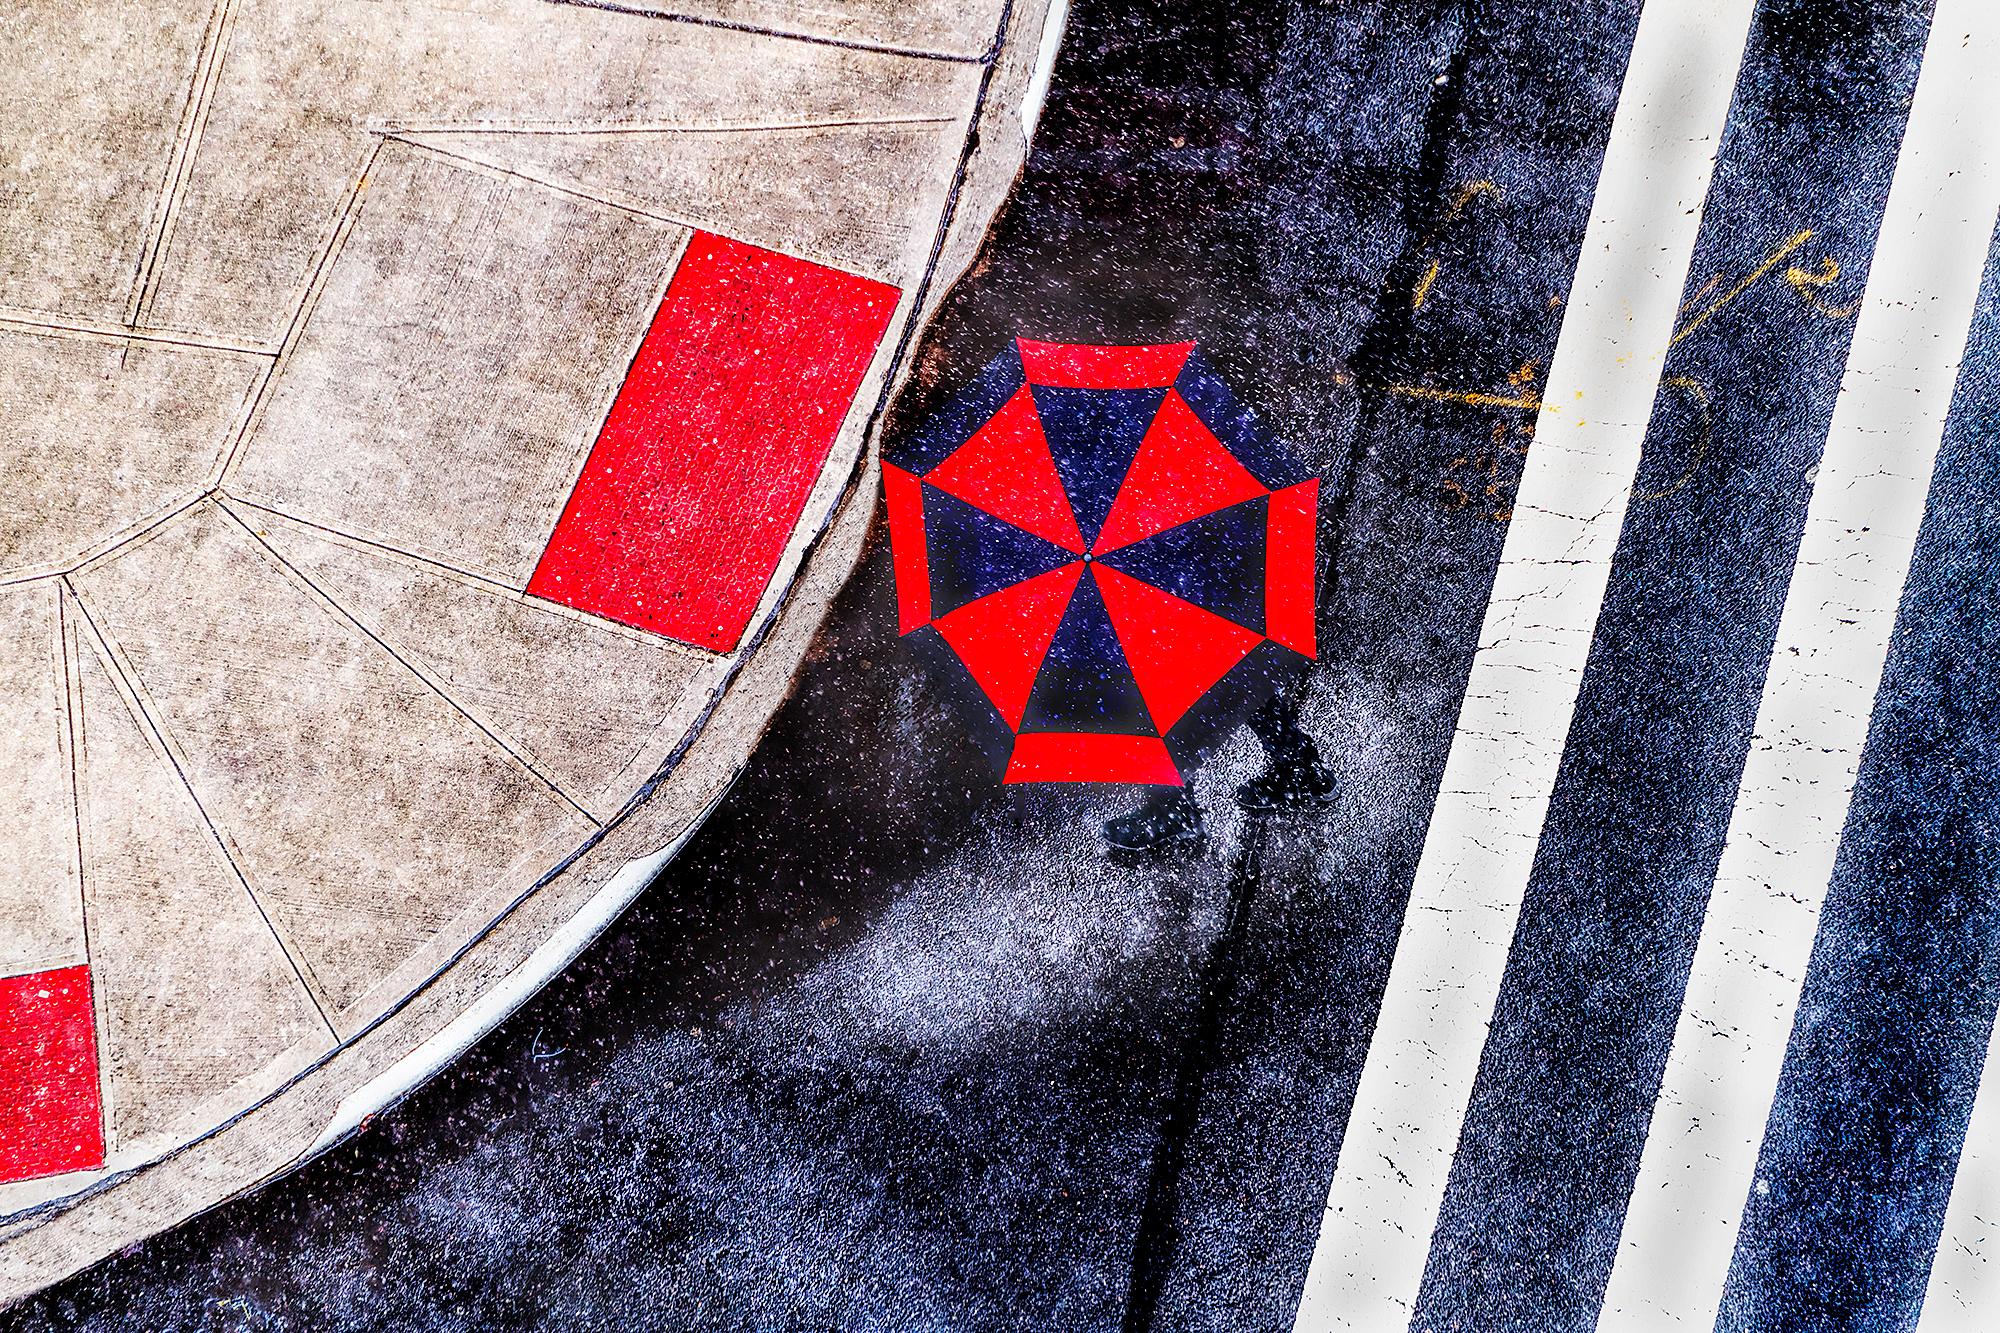 Mitchell Funk Abstract Photograph - Two Boots and an Umbrella -  Red and Black Color Field Photography